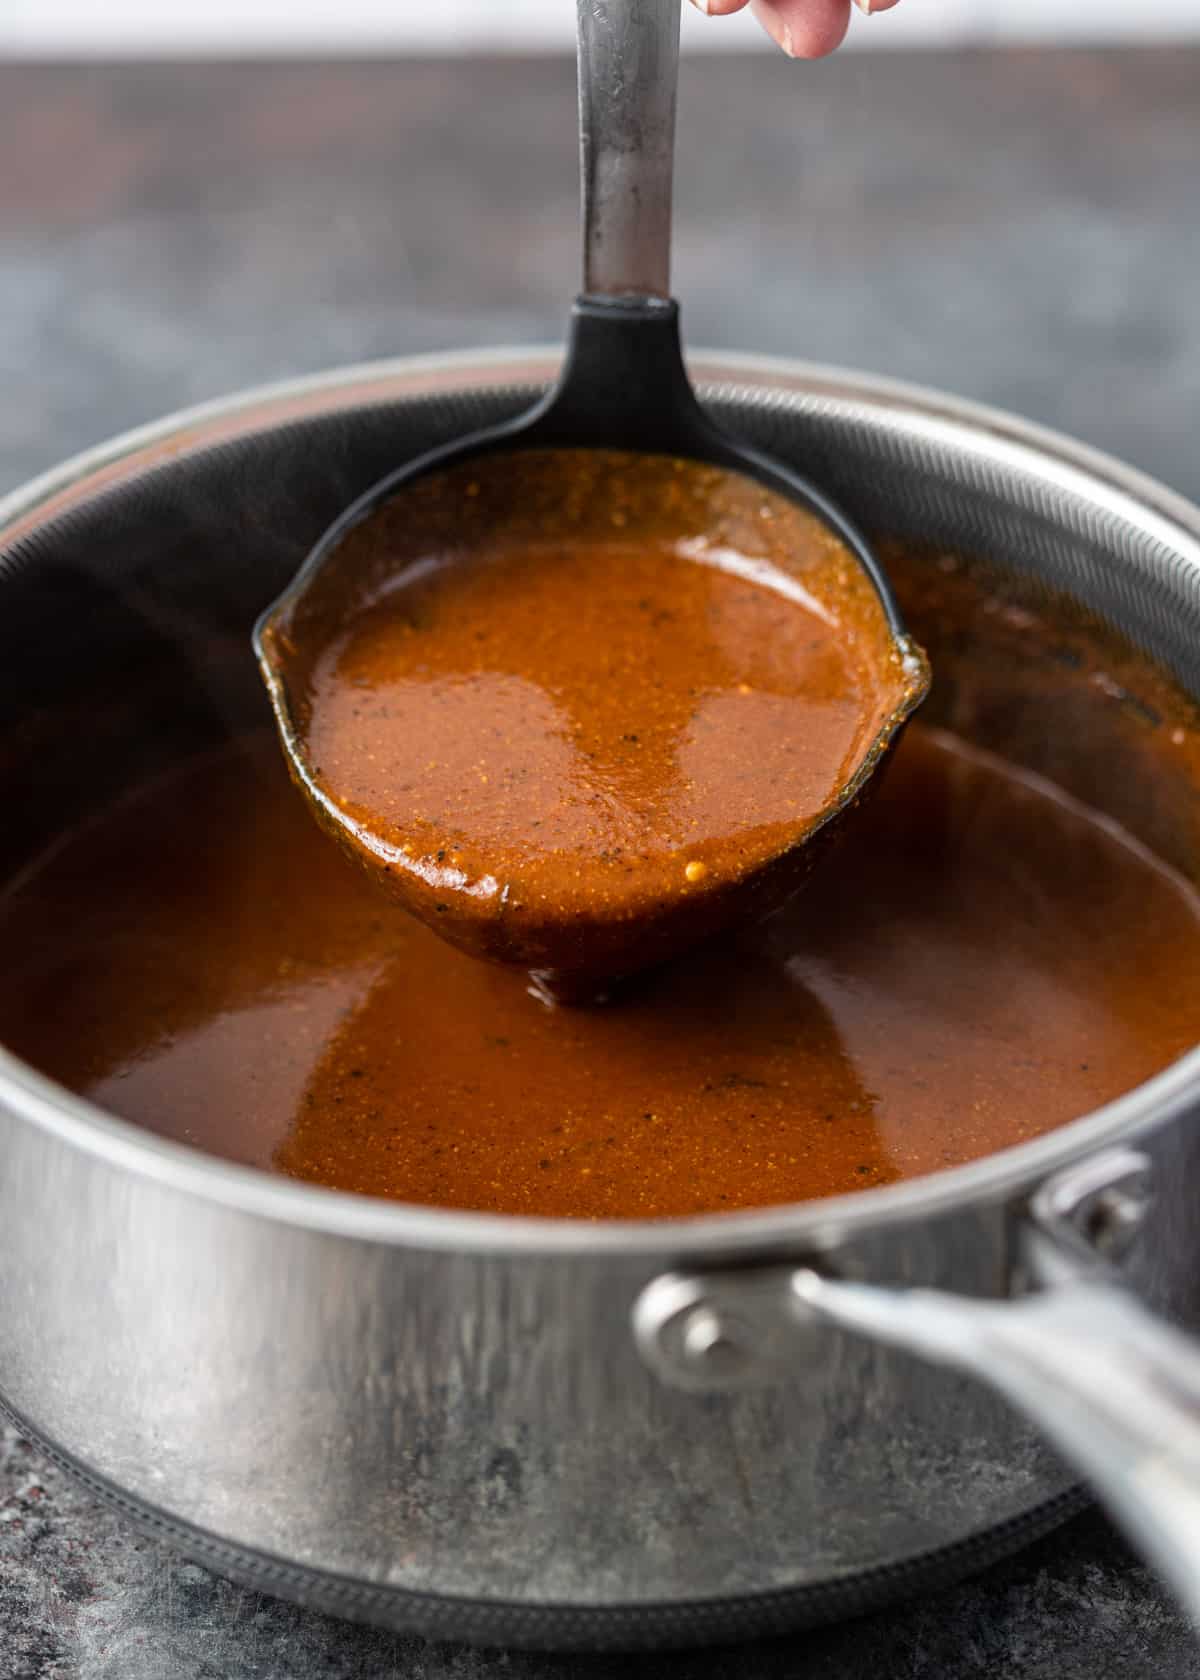 closeup: a ladle full of chili gravy over a pot with more gravy